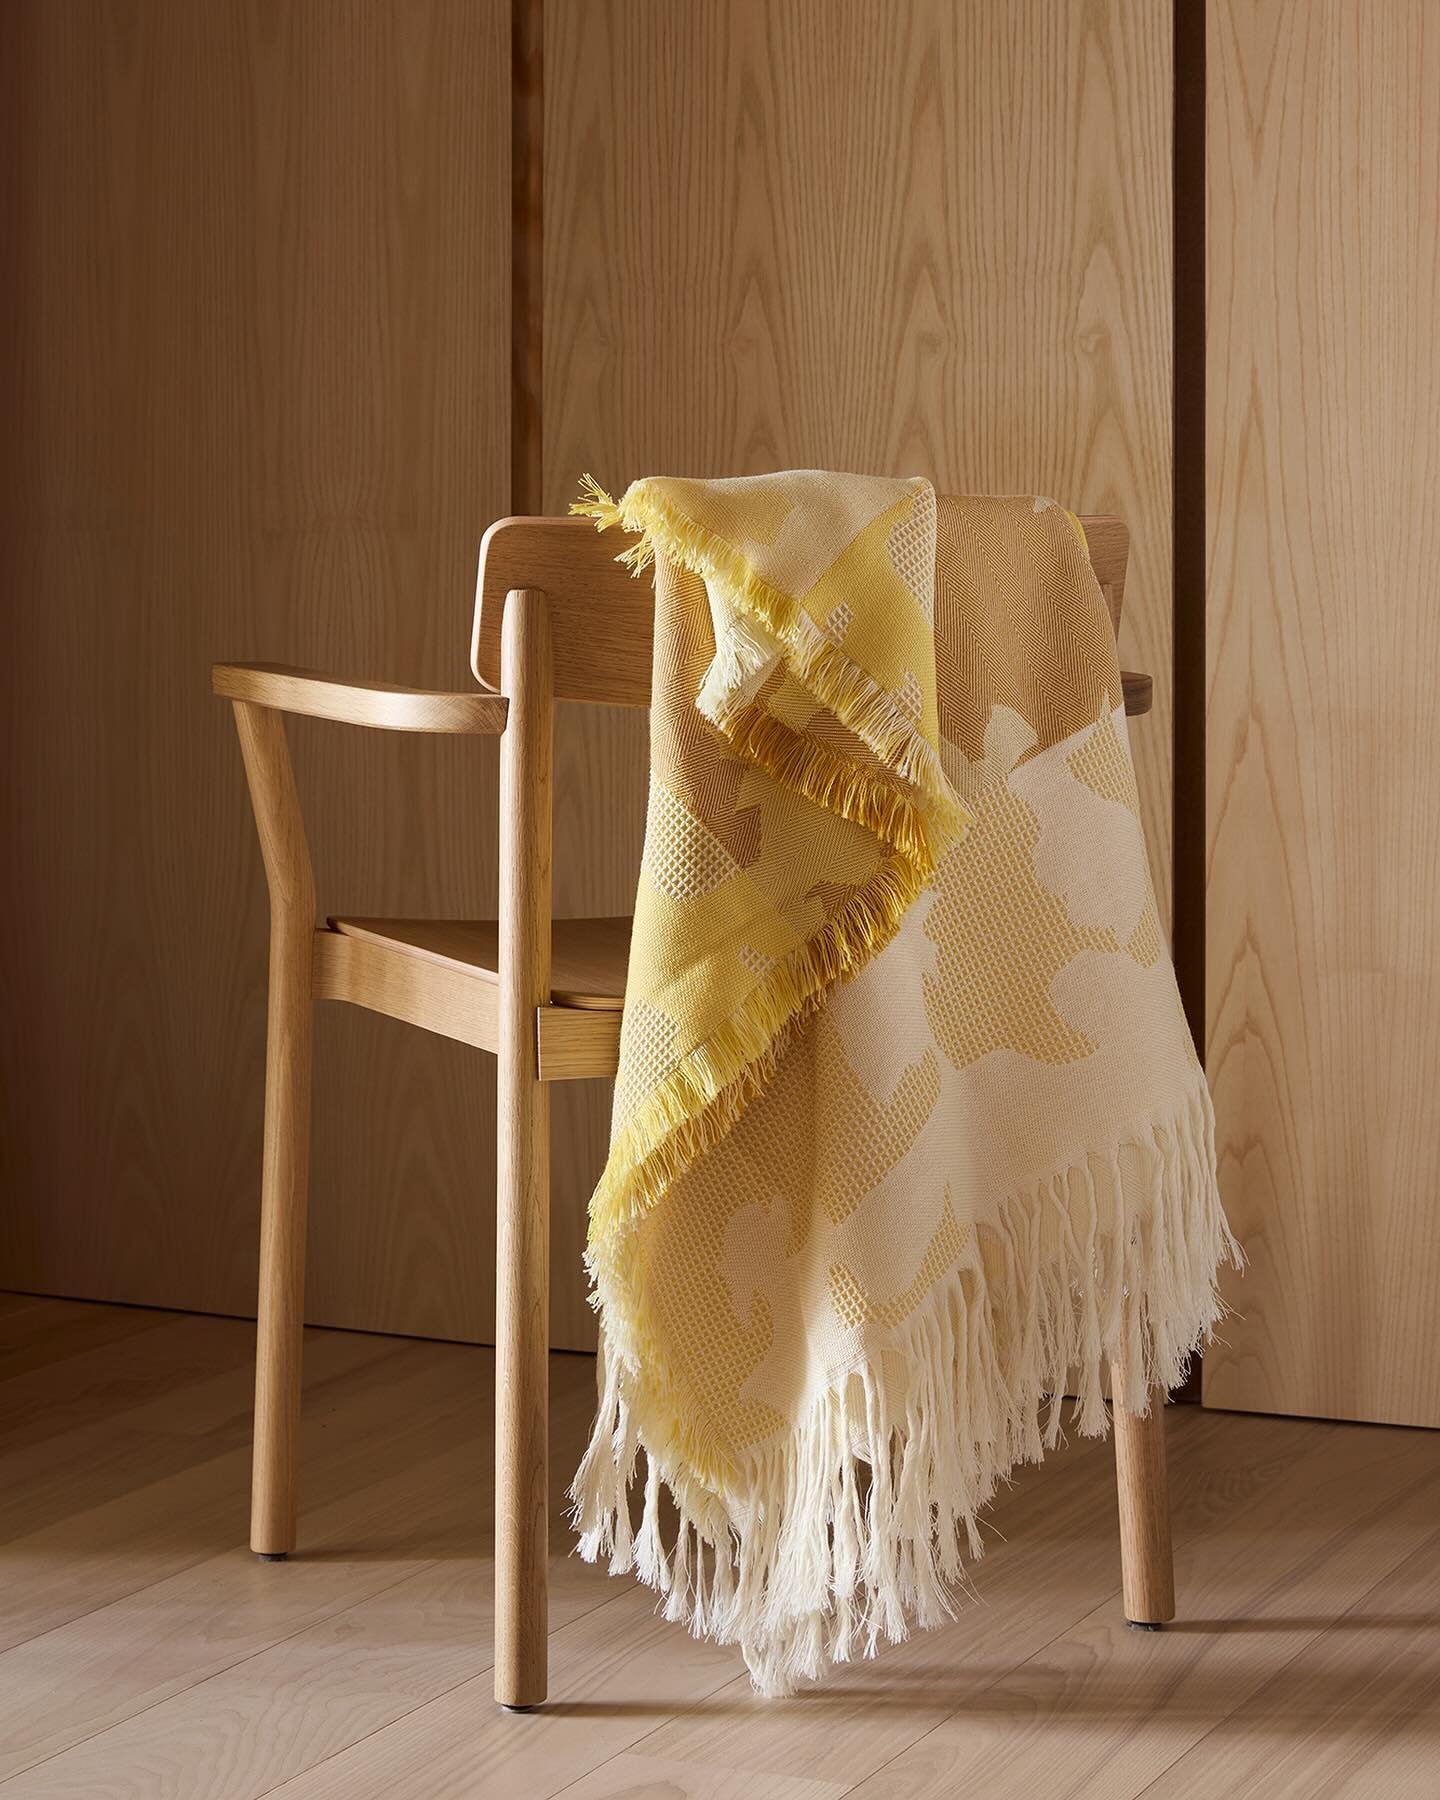 🟡 New colour☀️🌻🍌 The Heritage throw is now launched in tones of yellow 🌖Perfect for chilly summer nights. The Merino wool is soft and light and does not itch. These tones go very well with more neurals like beige, white and wooden interiors.

Lin